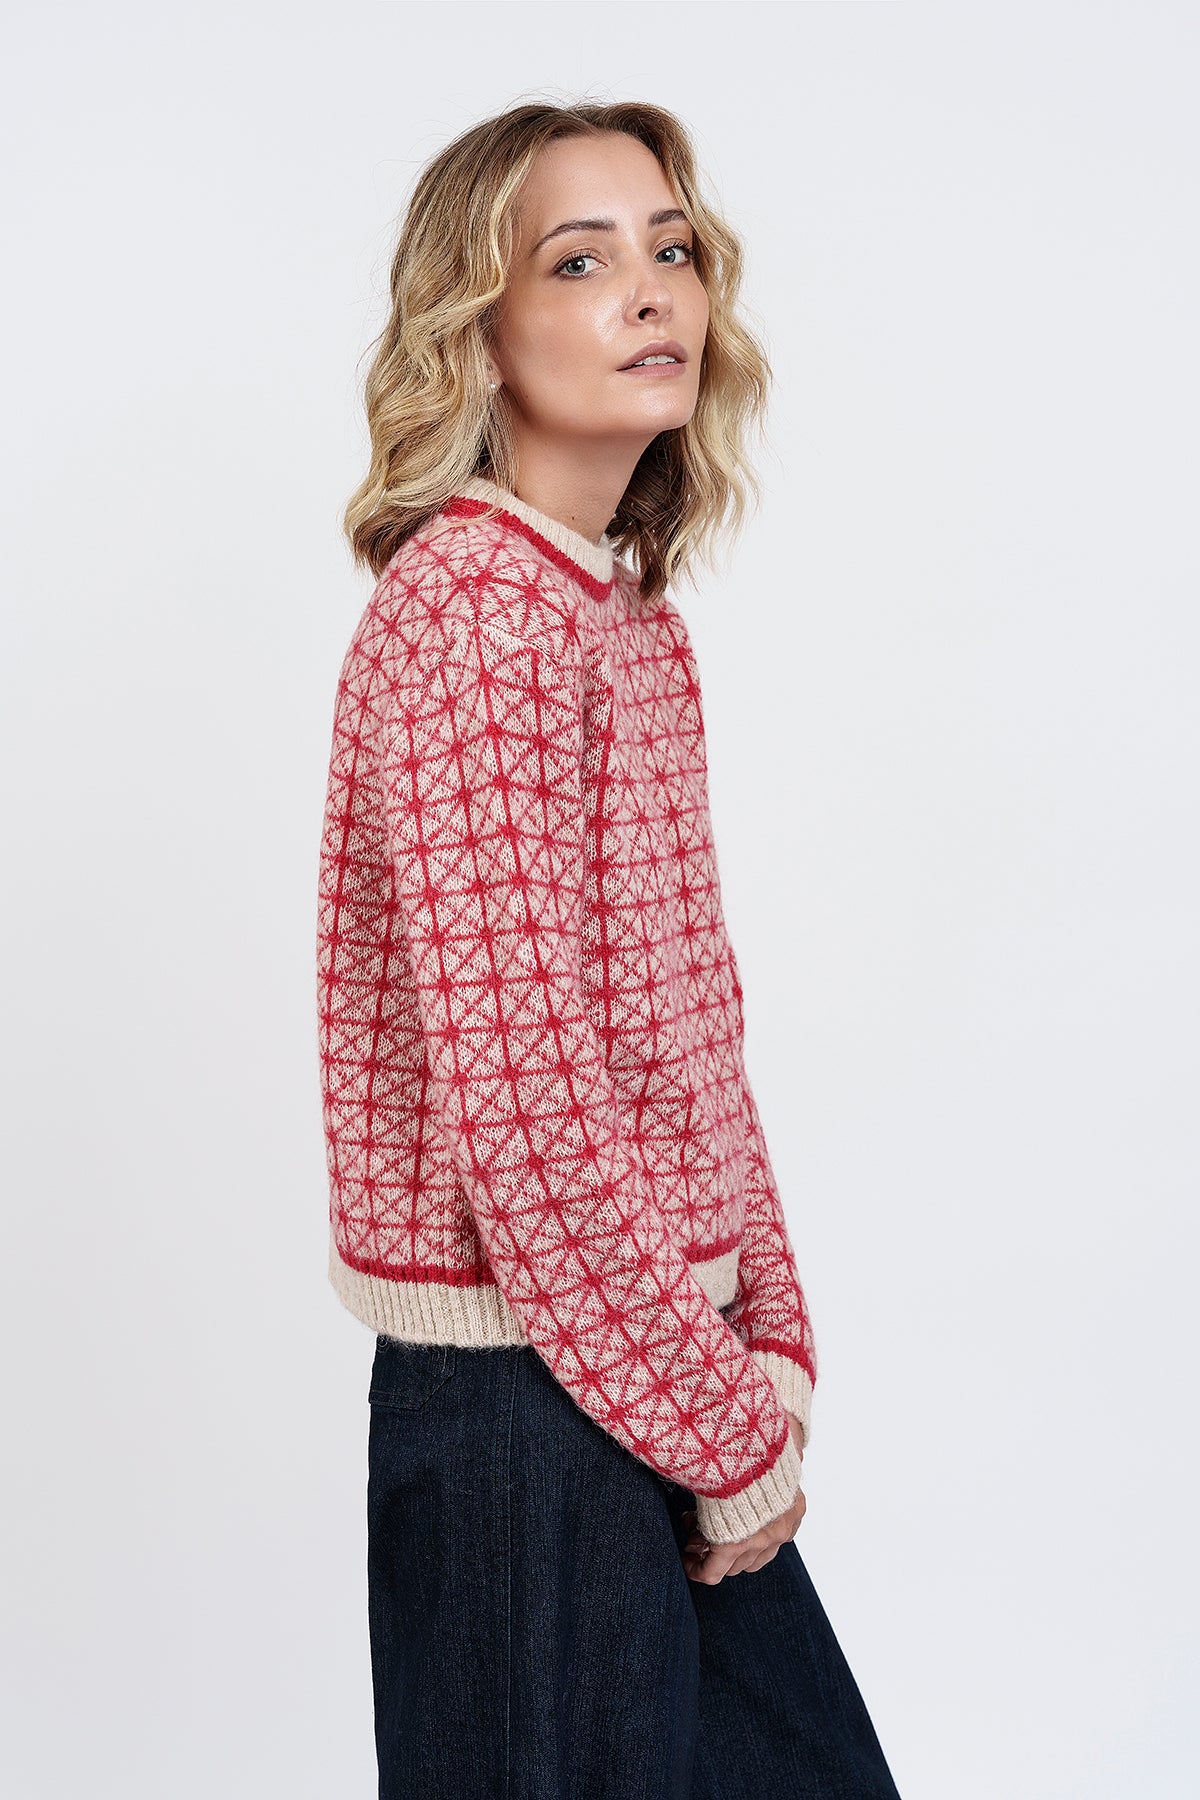 Beige and red GEOMETRIC JACQUARD SWEATER